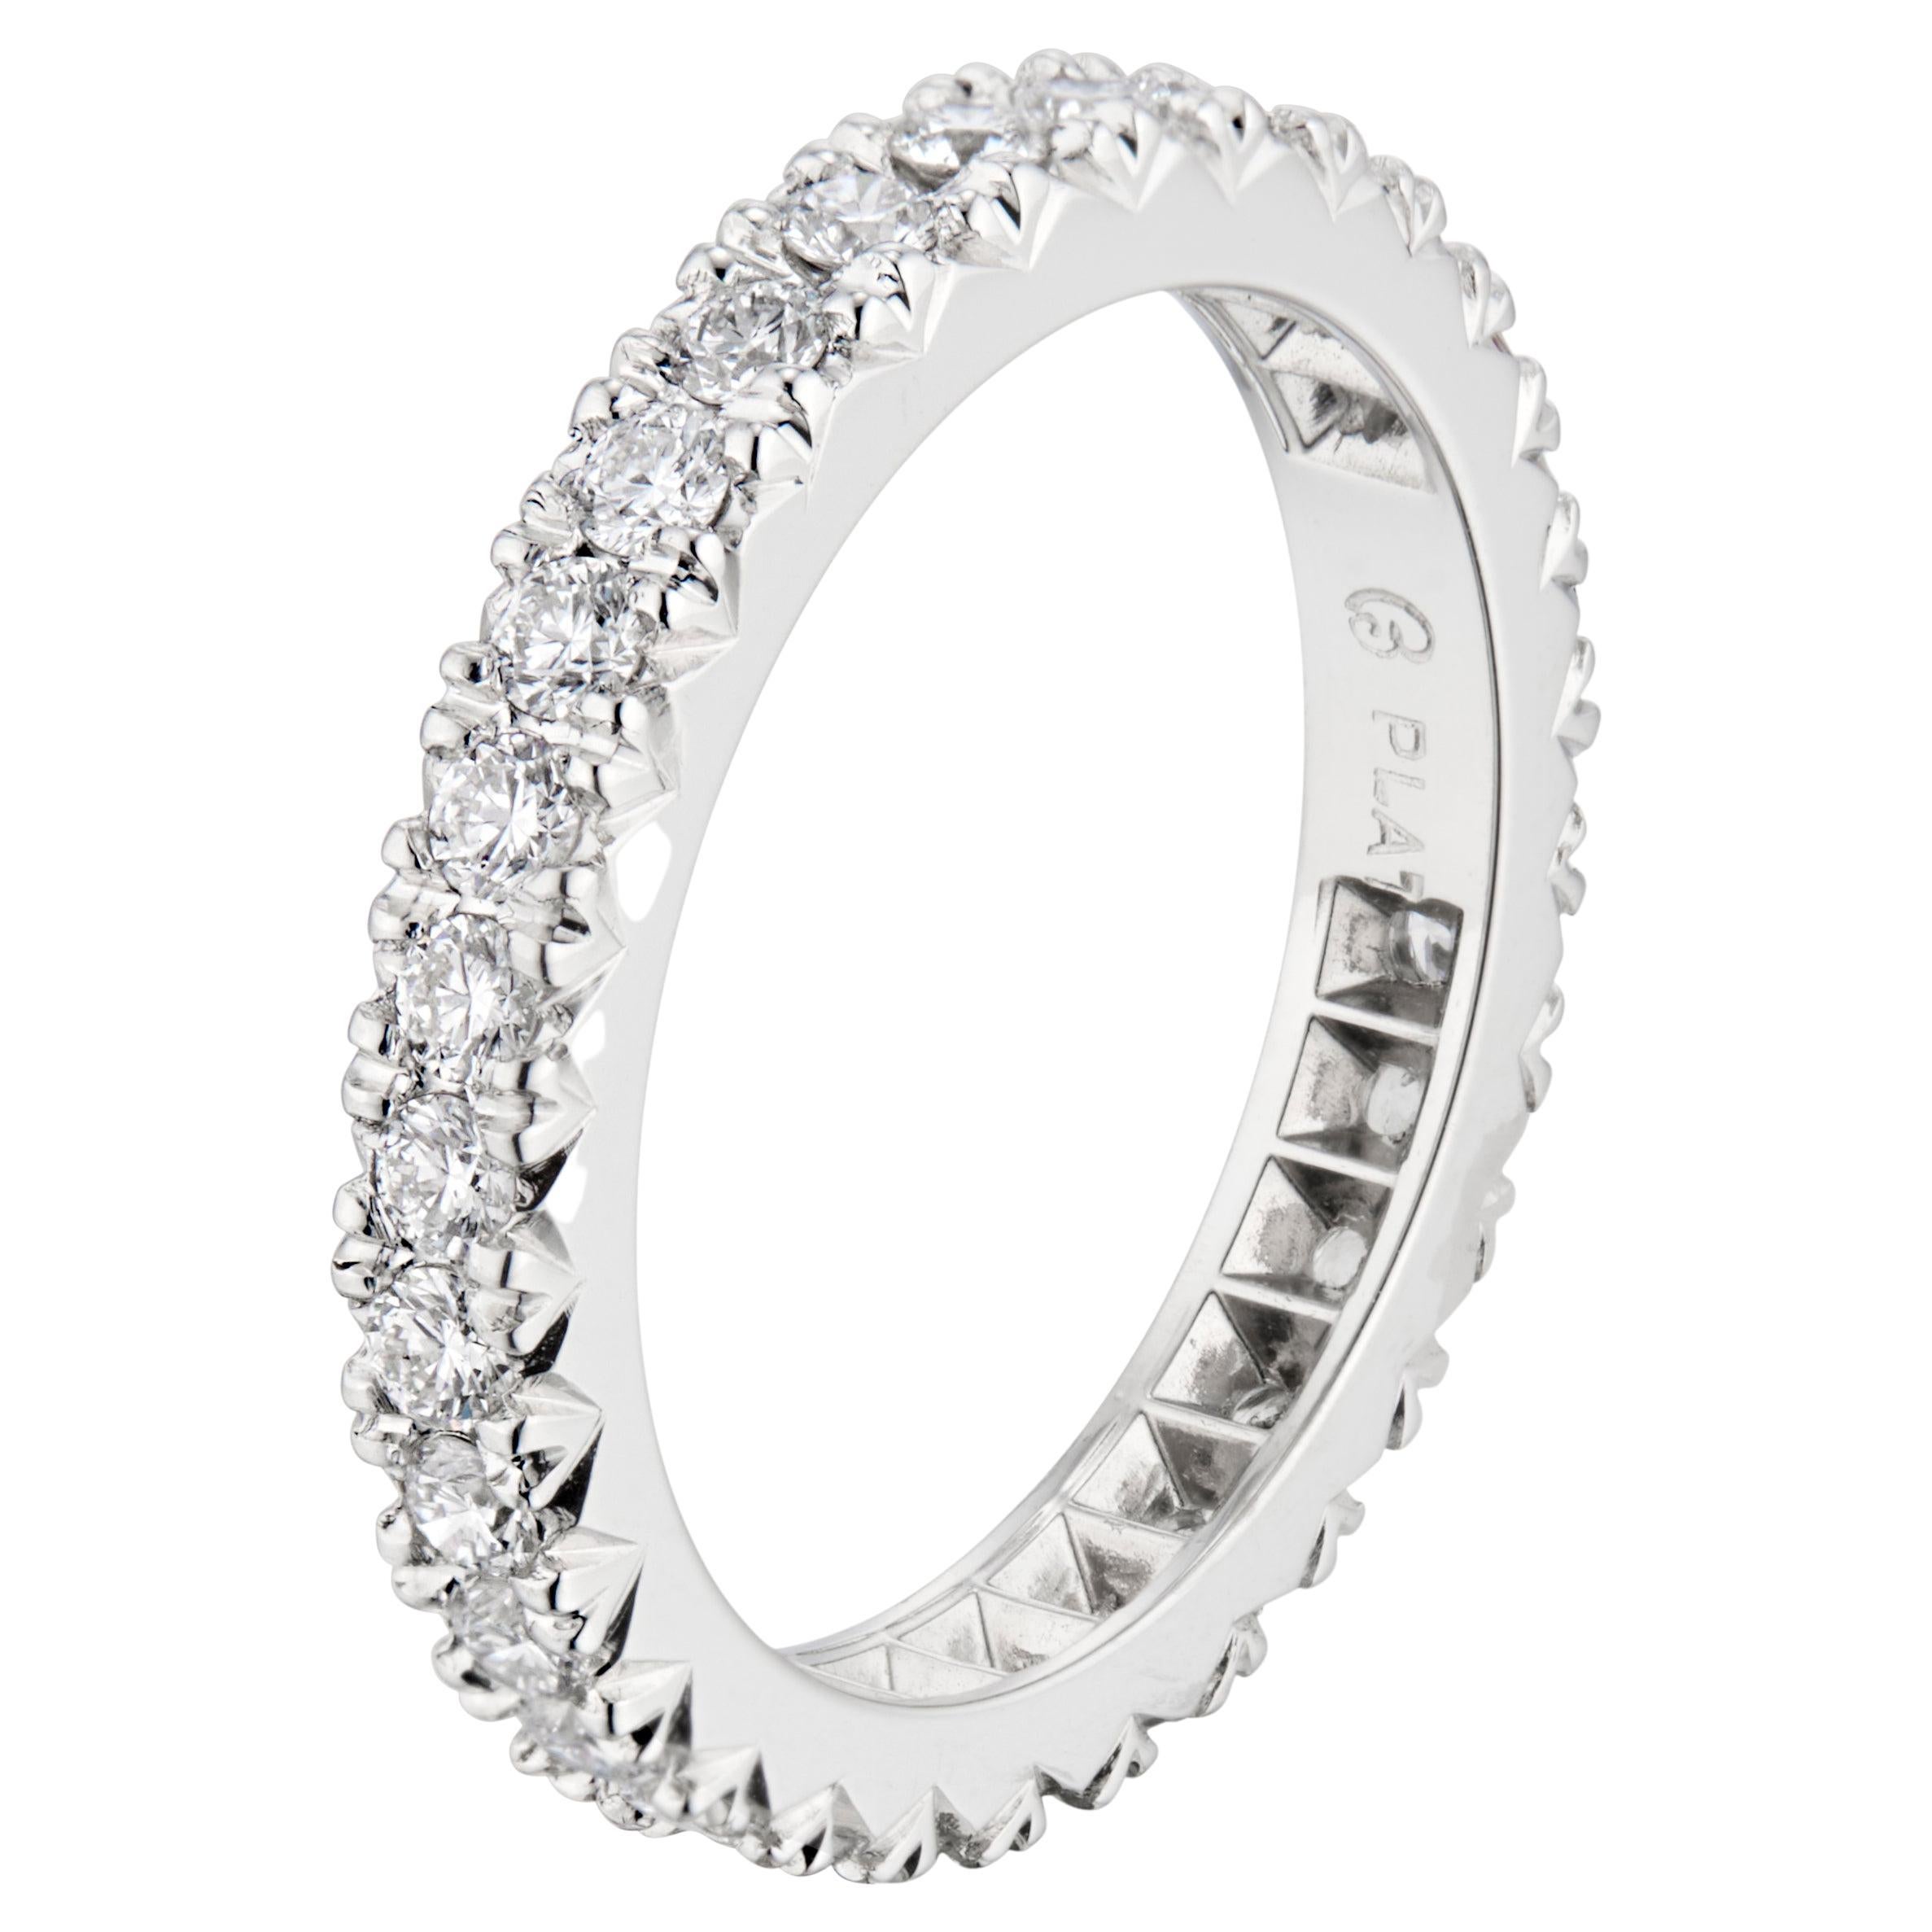 Diamond wedding band ring. 30 round brilliant cut diamonds set in a platinum eternity wedding band ring. 

30 round brilliant cut diamonds, G VS approx. .88cts
Size 6.5 and not sizable
Platinum 
Stamped: PLAT
5.6 grams
Width at top: 3mm
Height at